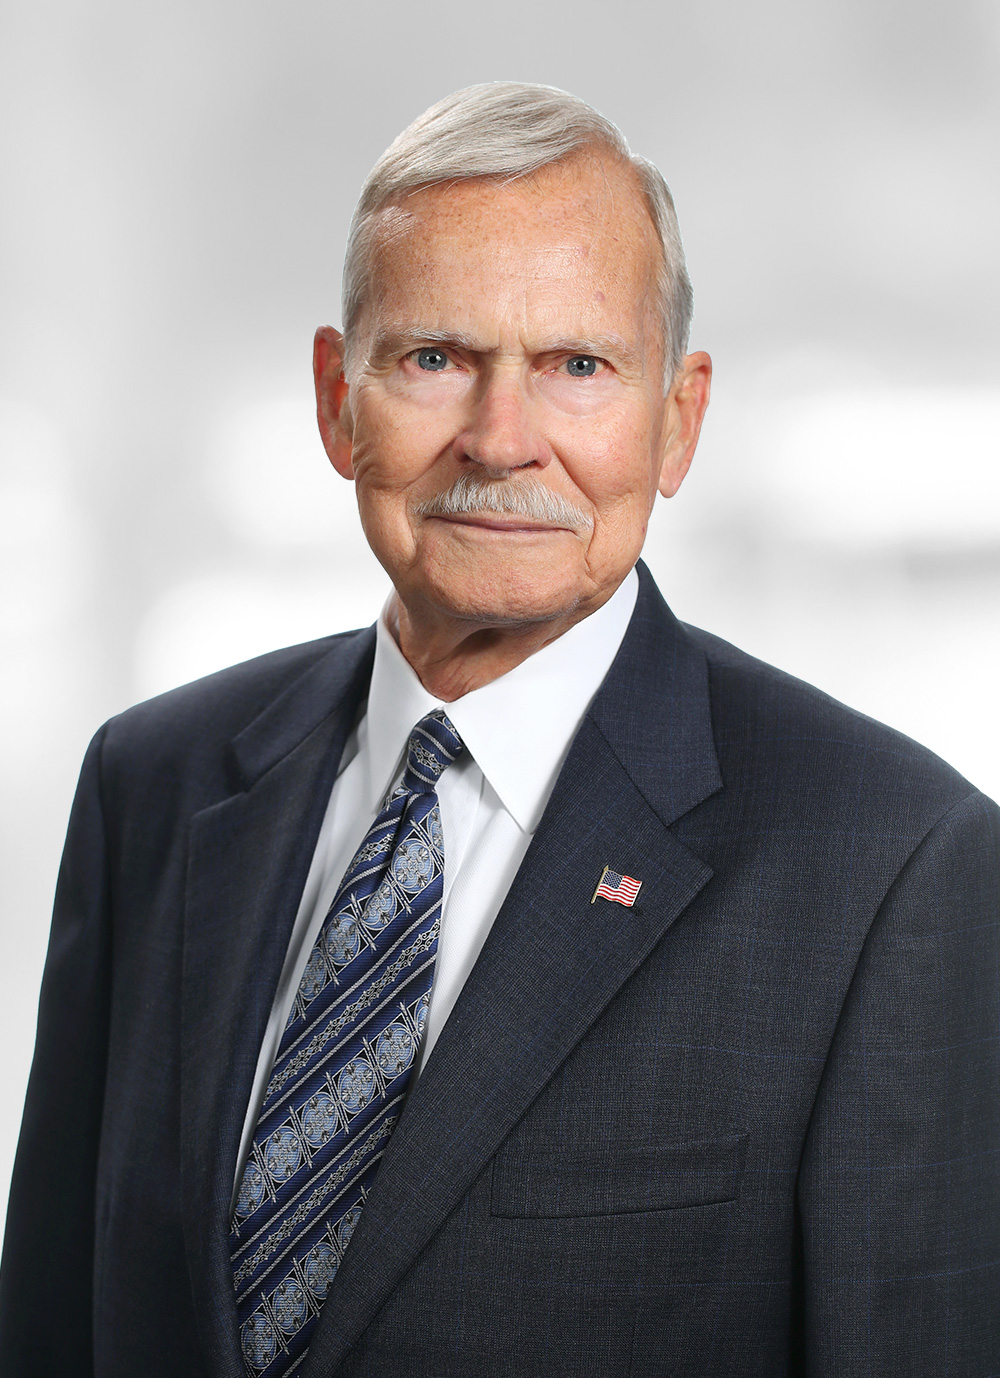 Terry Severson, President at Trace Systems